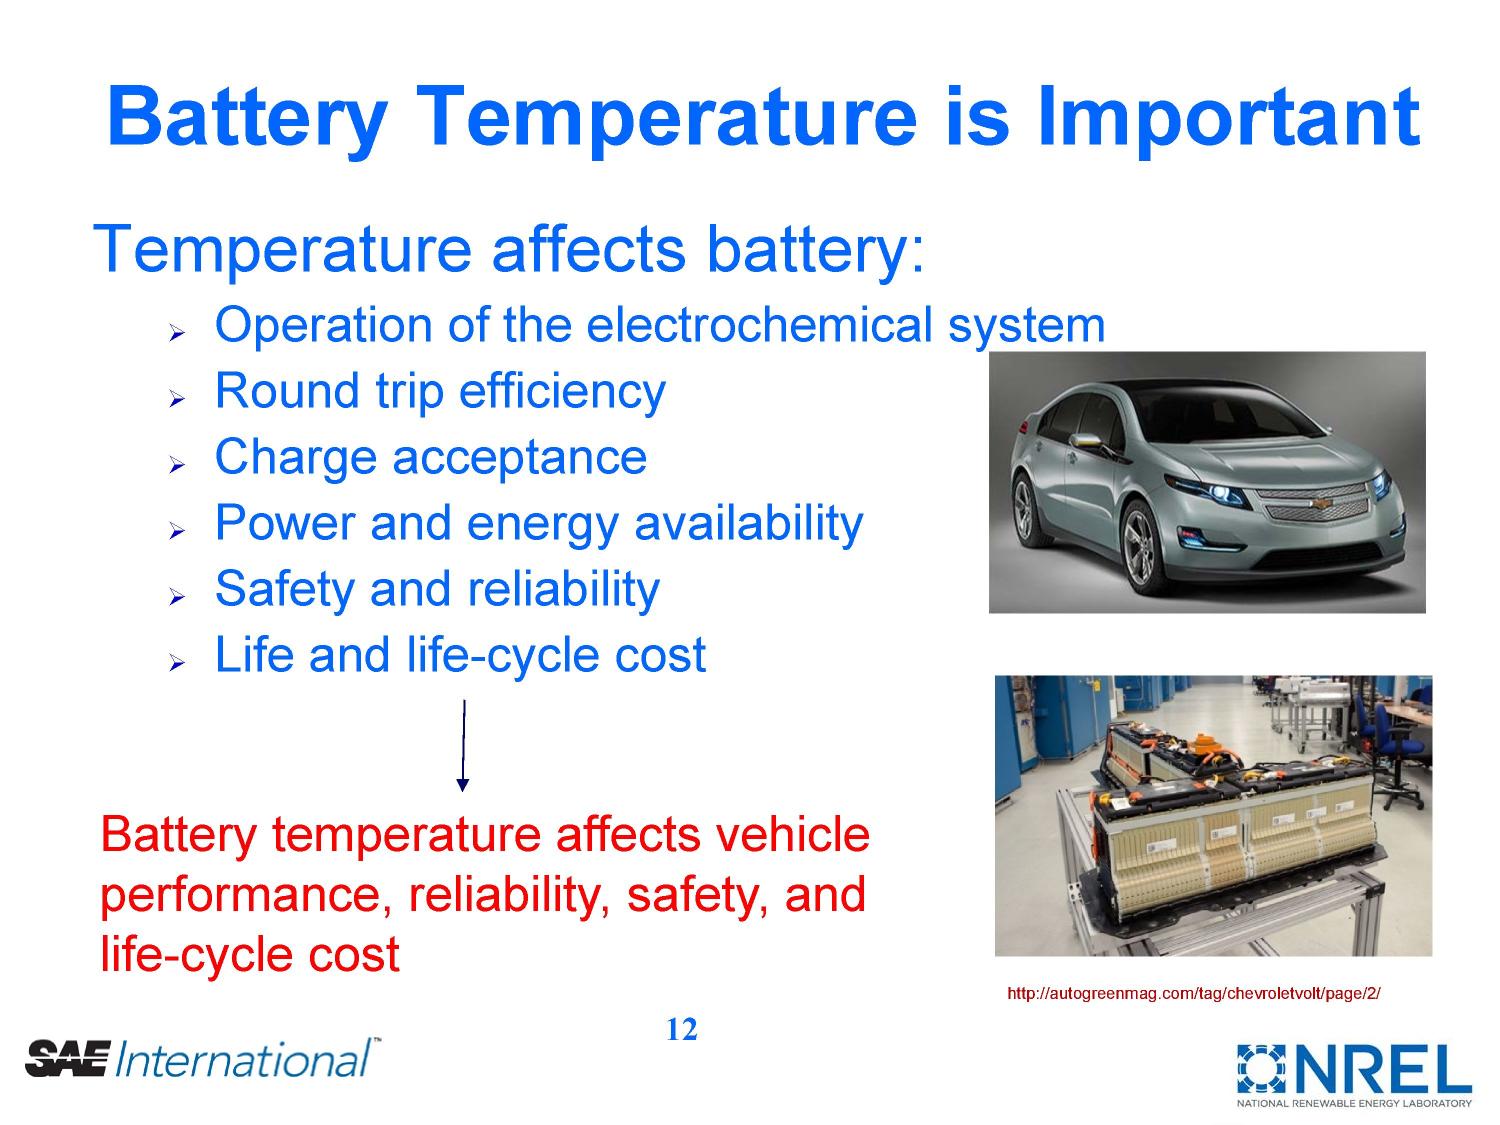 Electric Vehicle Battery Thermal Issues and Thermal Management